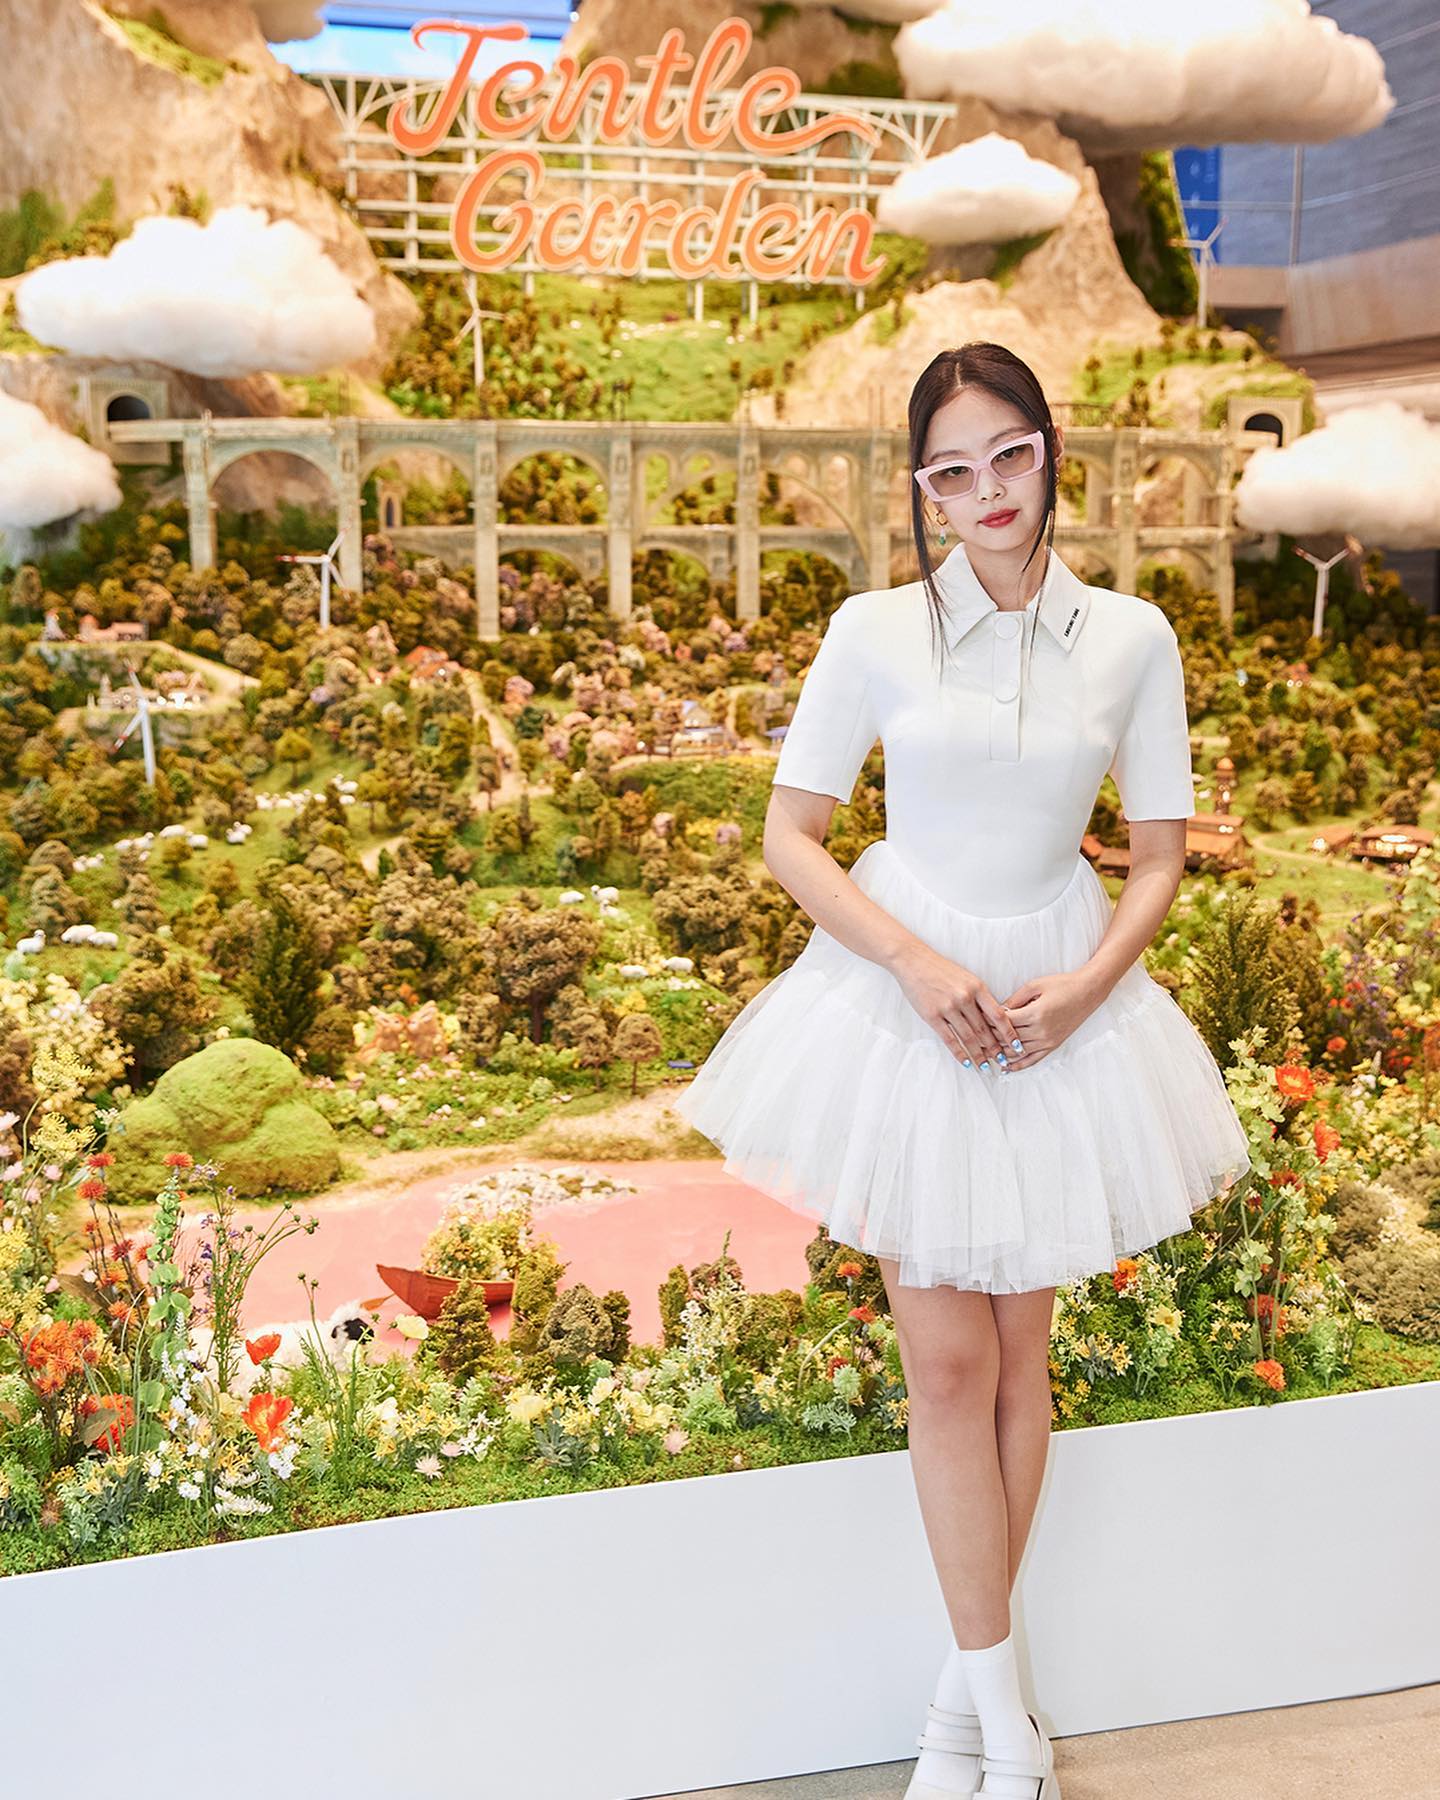 Jennie x Gentle Monster Launches Mobile Game Jentle Garden